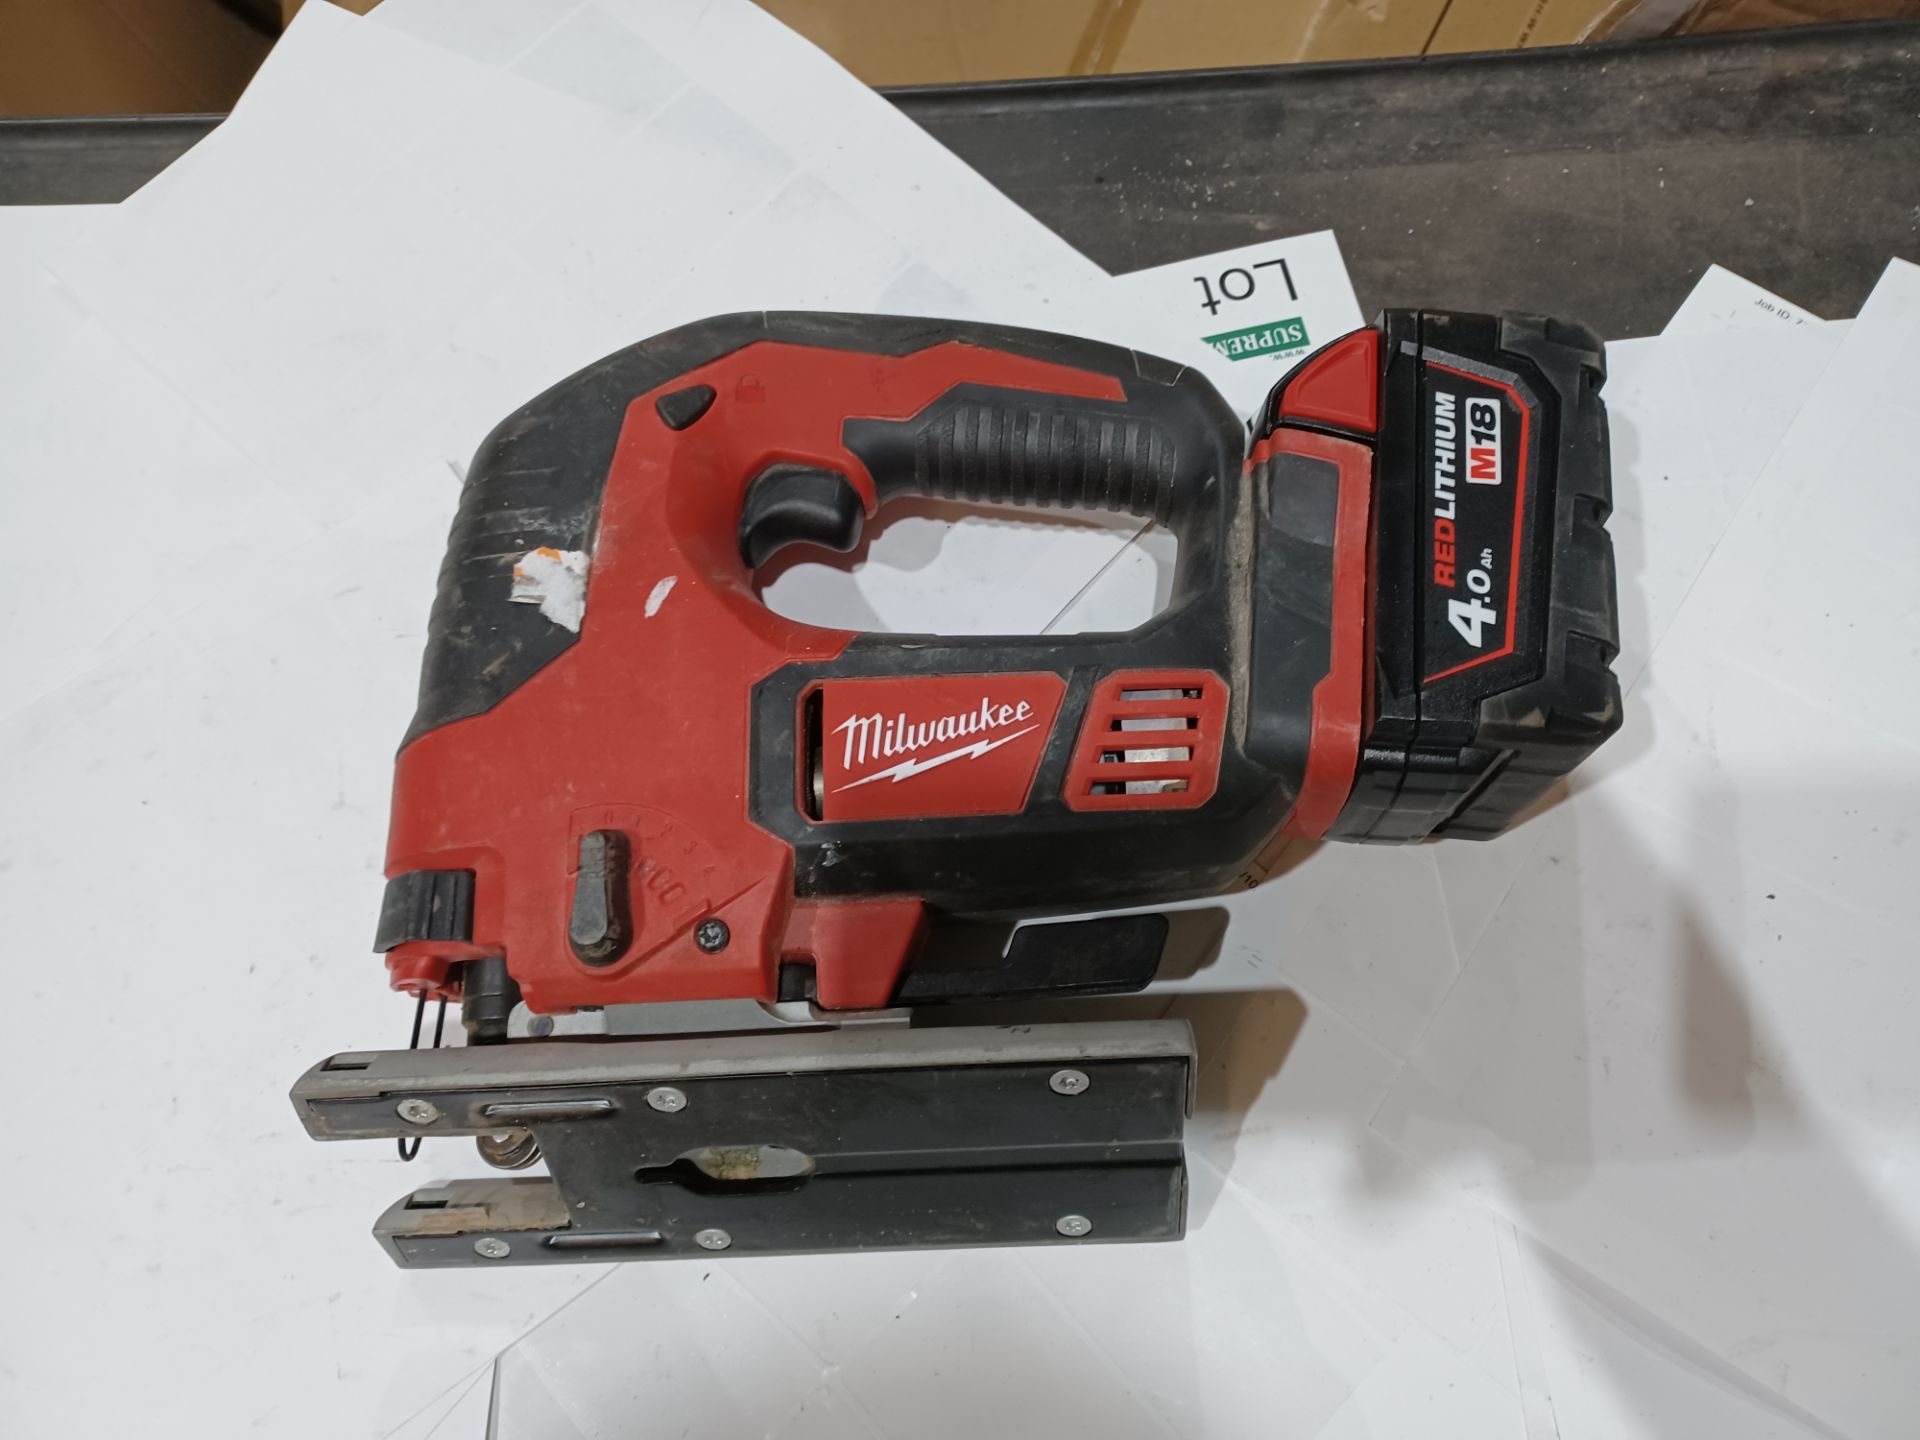 MILWAUKEE M18 BJS-0 18V LI-ION CORDLESS JIGSAW - BARE WITH BATTERY UNCHECKED/UNTESTED - BWPCK